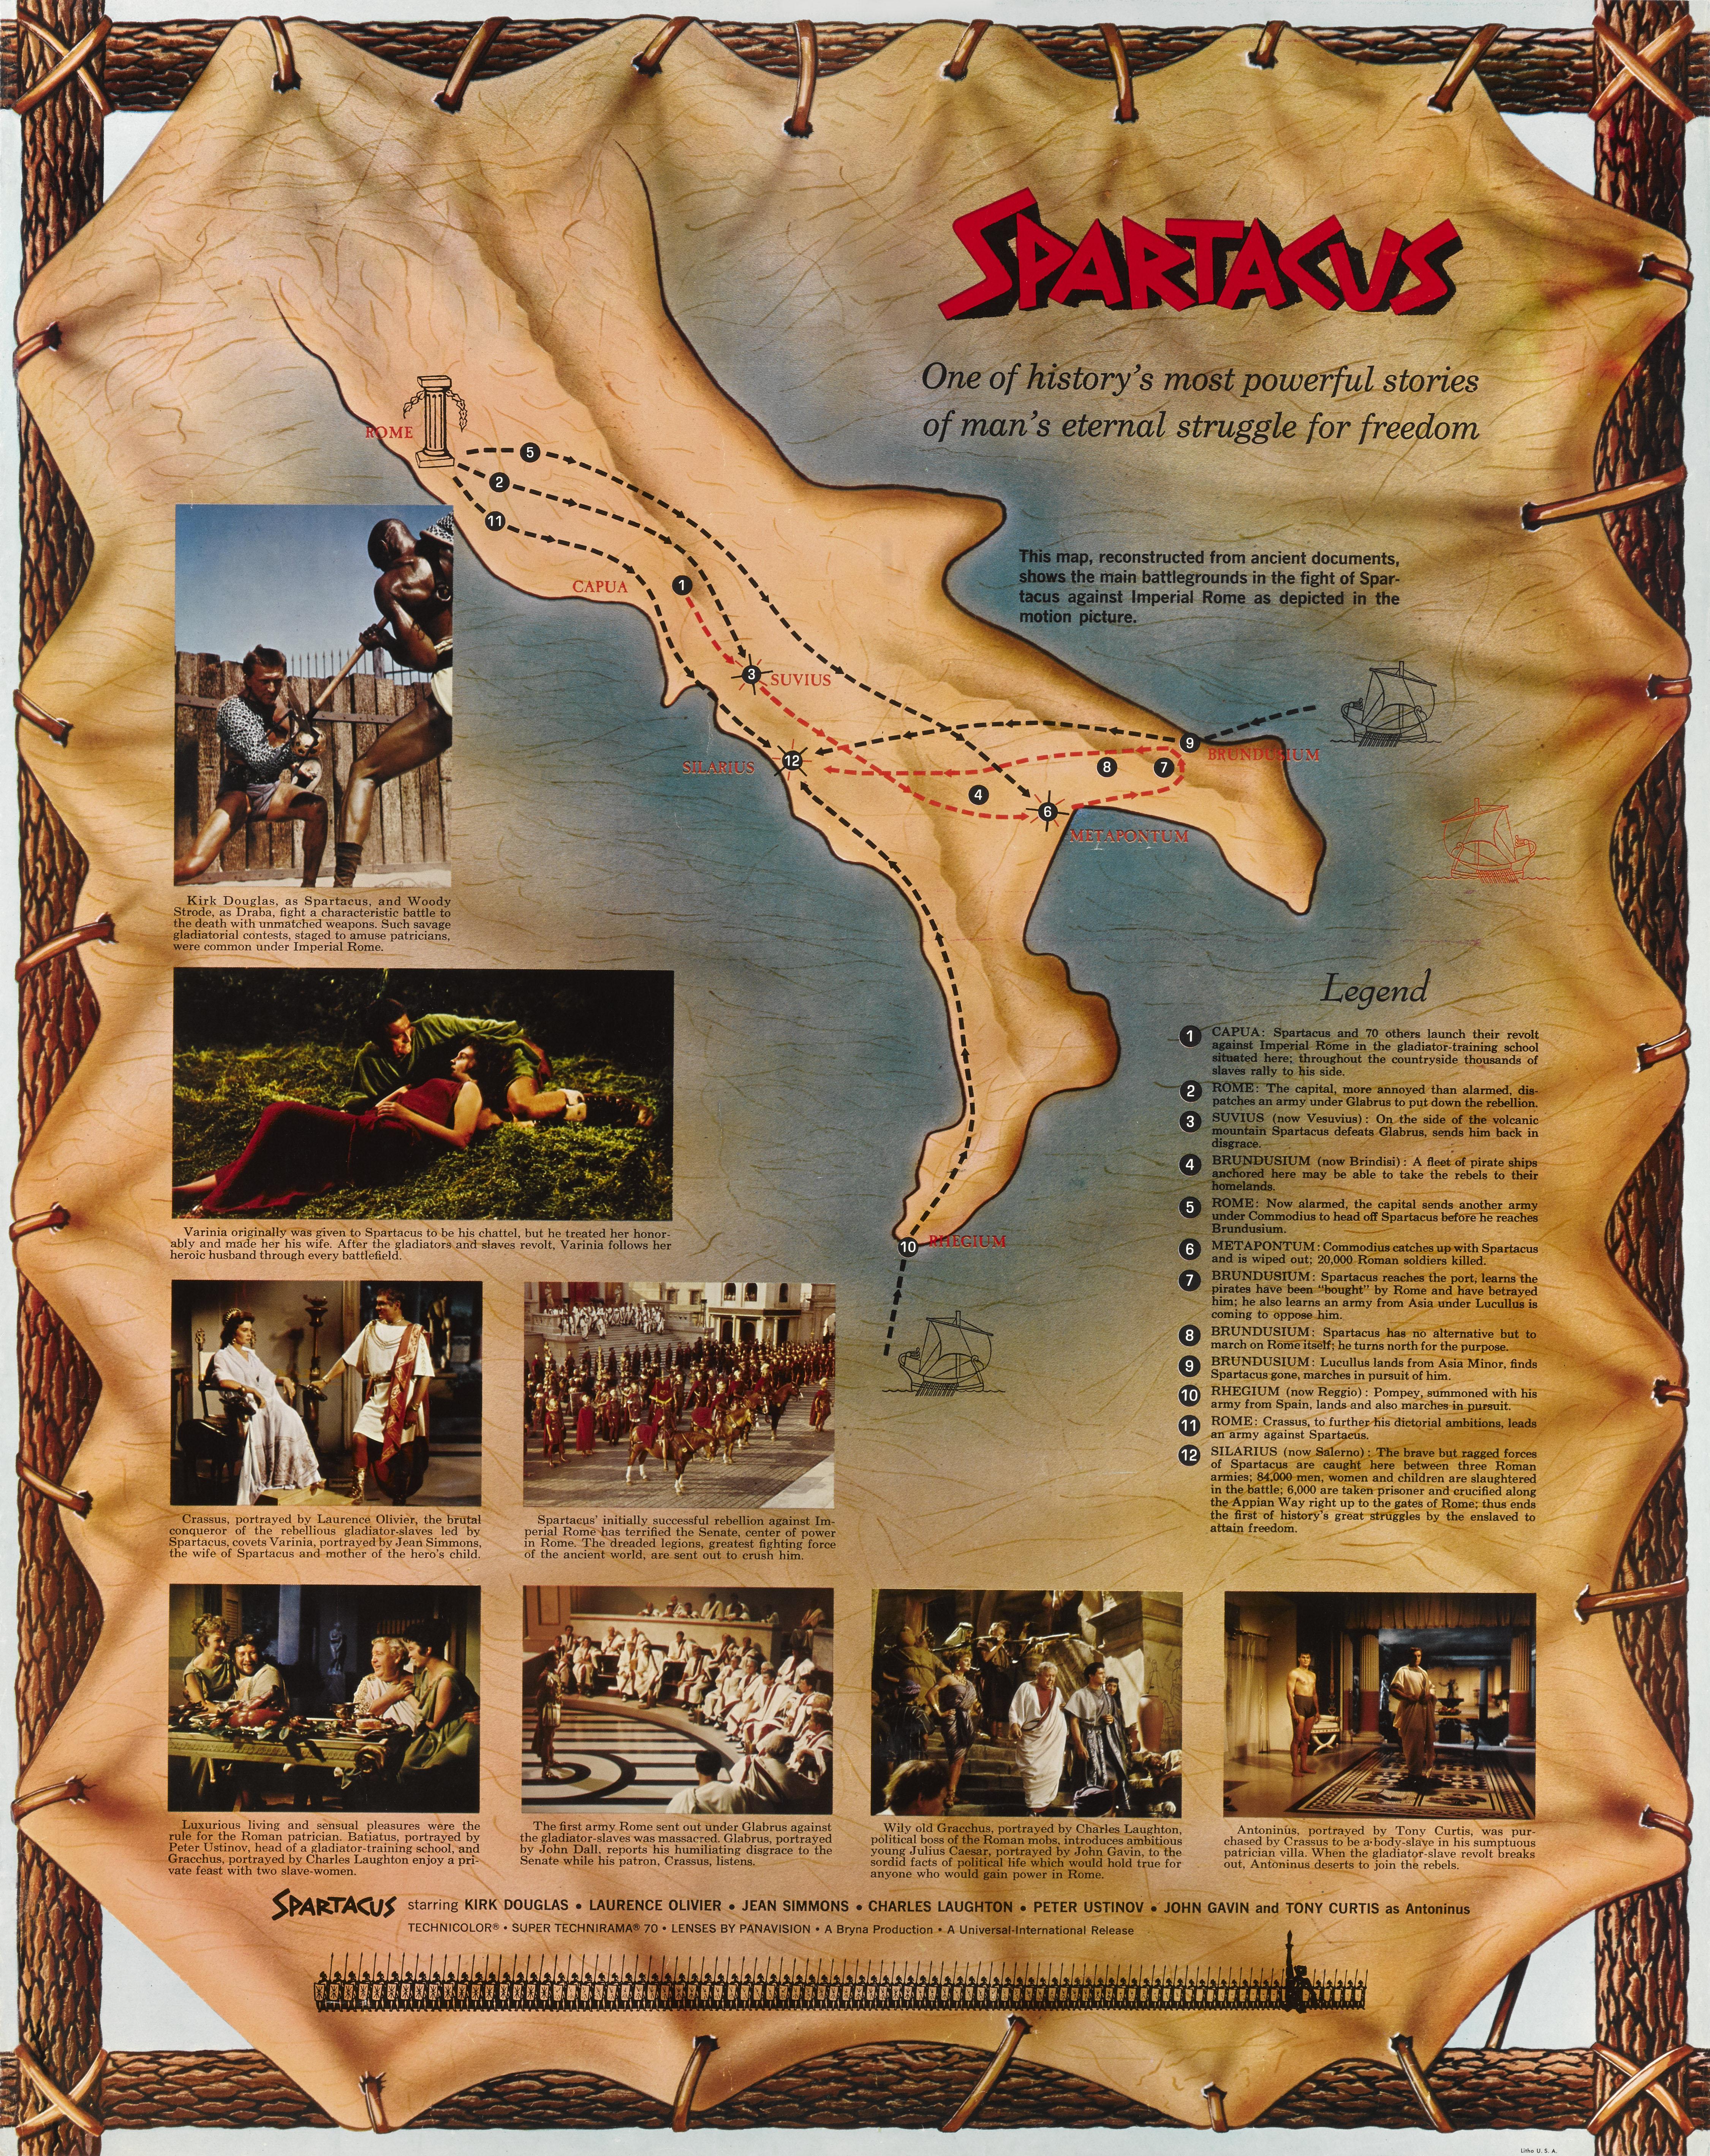 Original Special Road show style US film poster for “Spartacus” (1960) This film was directed by Stanley Kubrick and stared Kirk Douglas, Laurence Olivier, Charles Laughton, Tony Curtis, Jean Simmons, Peter Ustinov, John Gavin. This epic historical